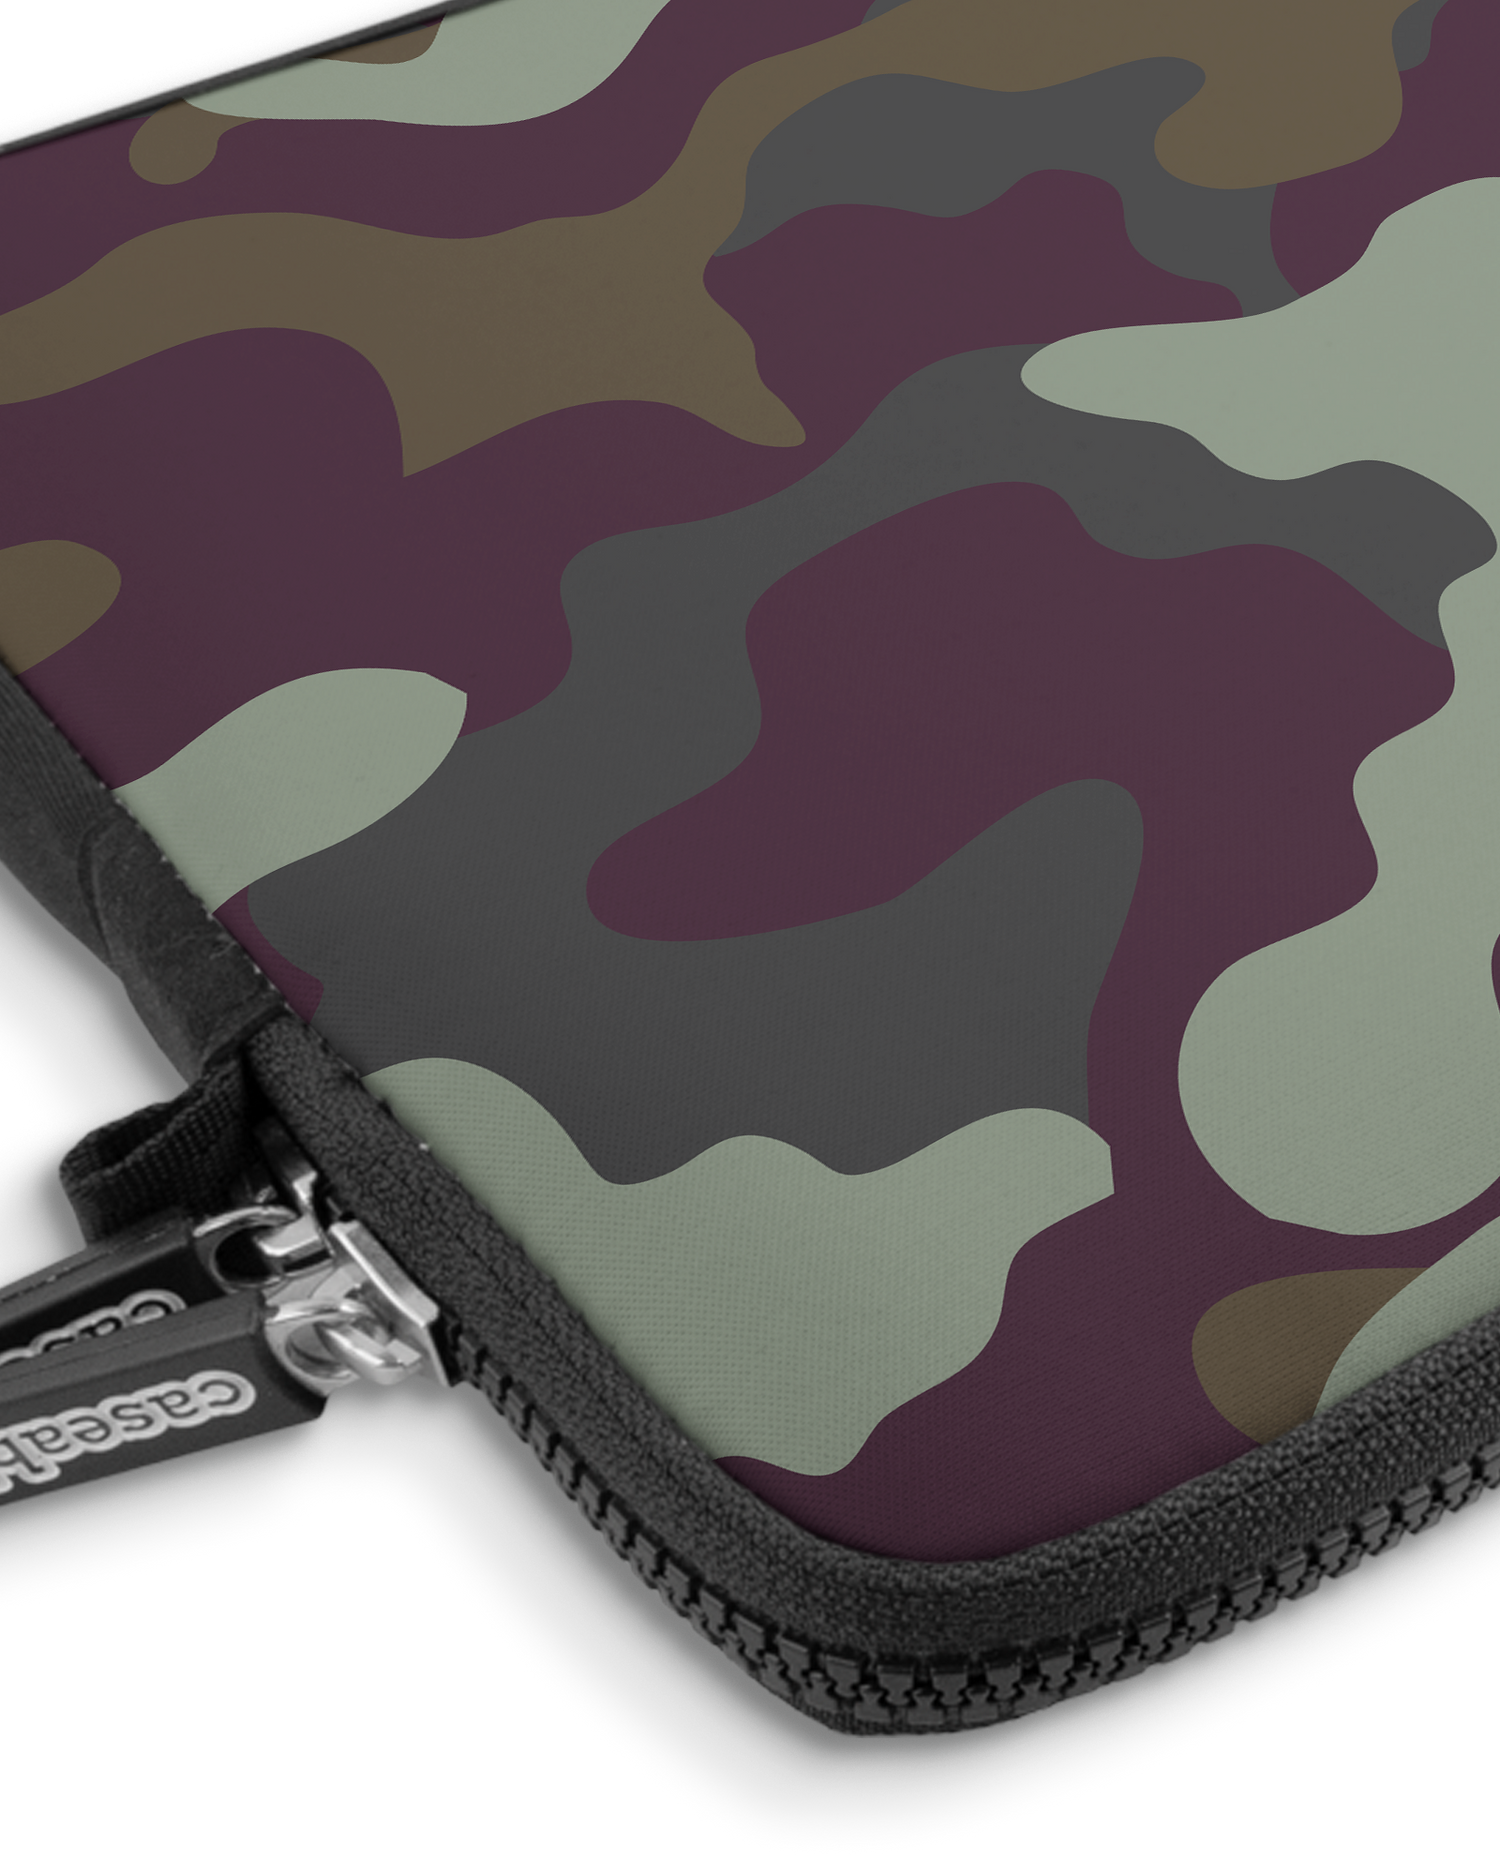 Night Camo Premium Laptop Bag 13 inch with device inside